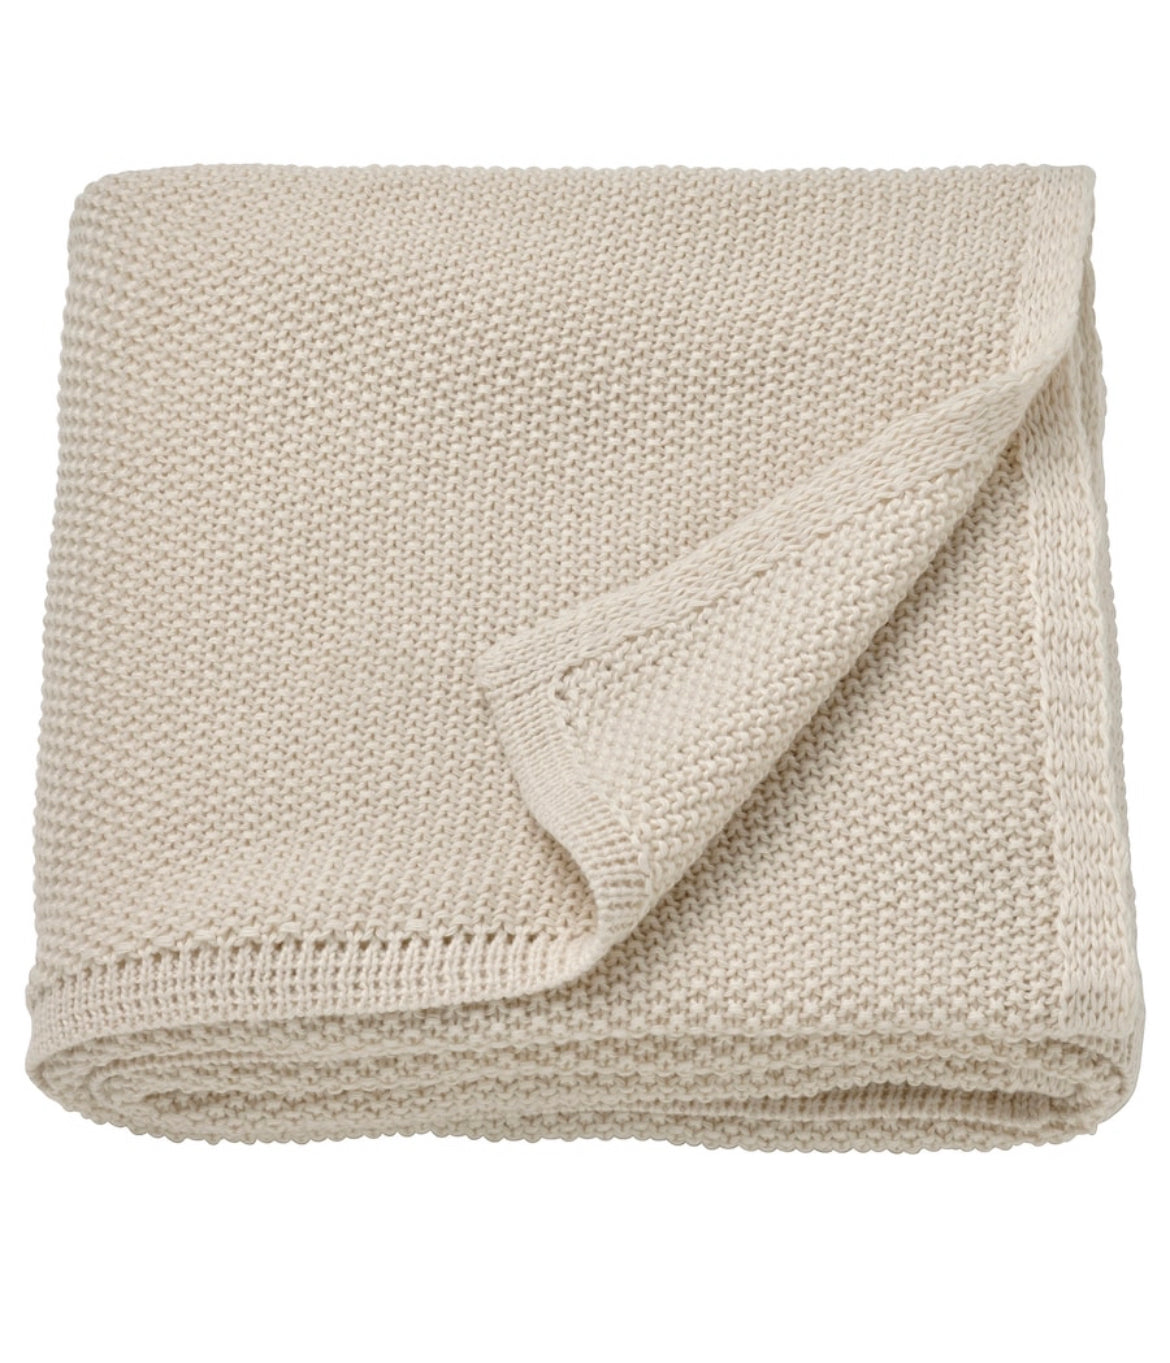 White Knitted Throw Blanket